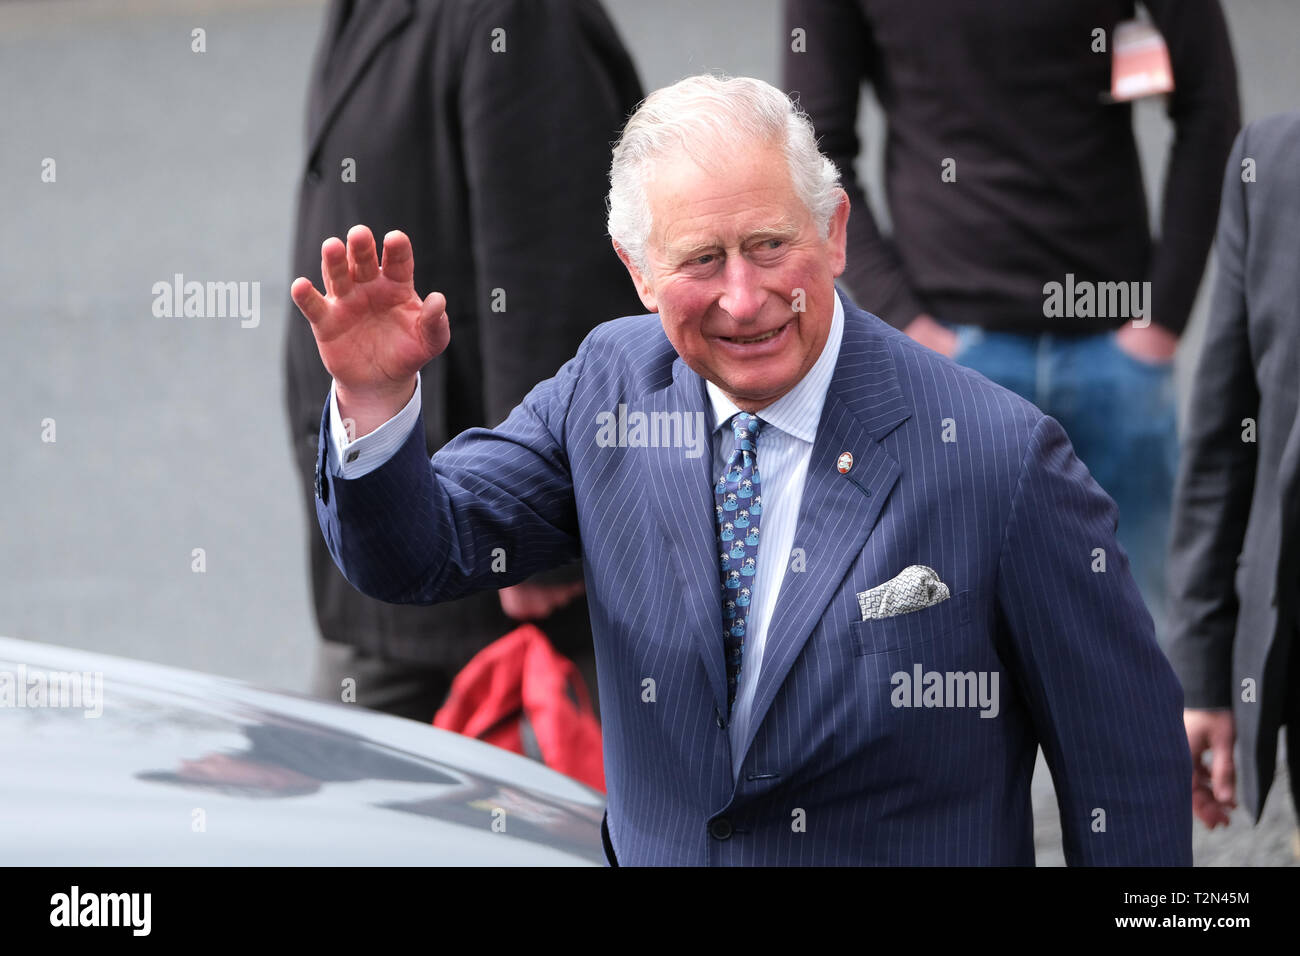 Wigan, UK. 3rd April 2019.  King Charles III, when he was the Prince of Wales, arriving at the Old Courts building in Wigan where he took a few minutes to talk to onlookers who had been waiting outside.  The was the first of three stops on his first visit to the Lancashire town. Credit: Paul Melling/Alamy Live News Stock Photo